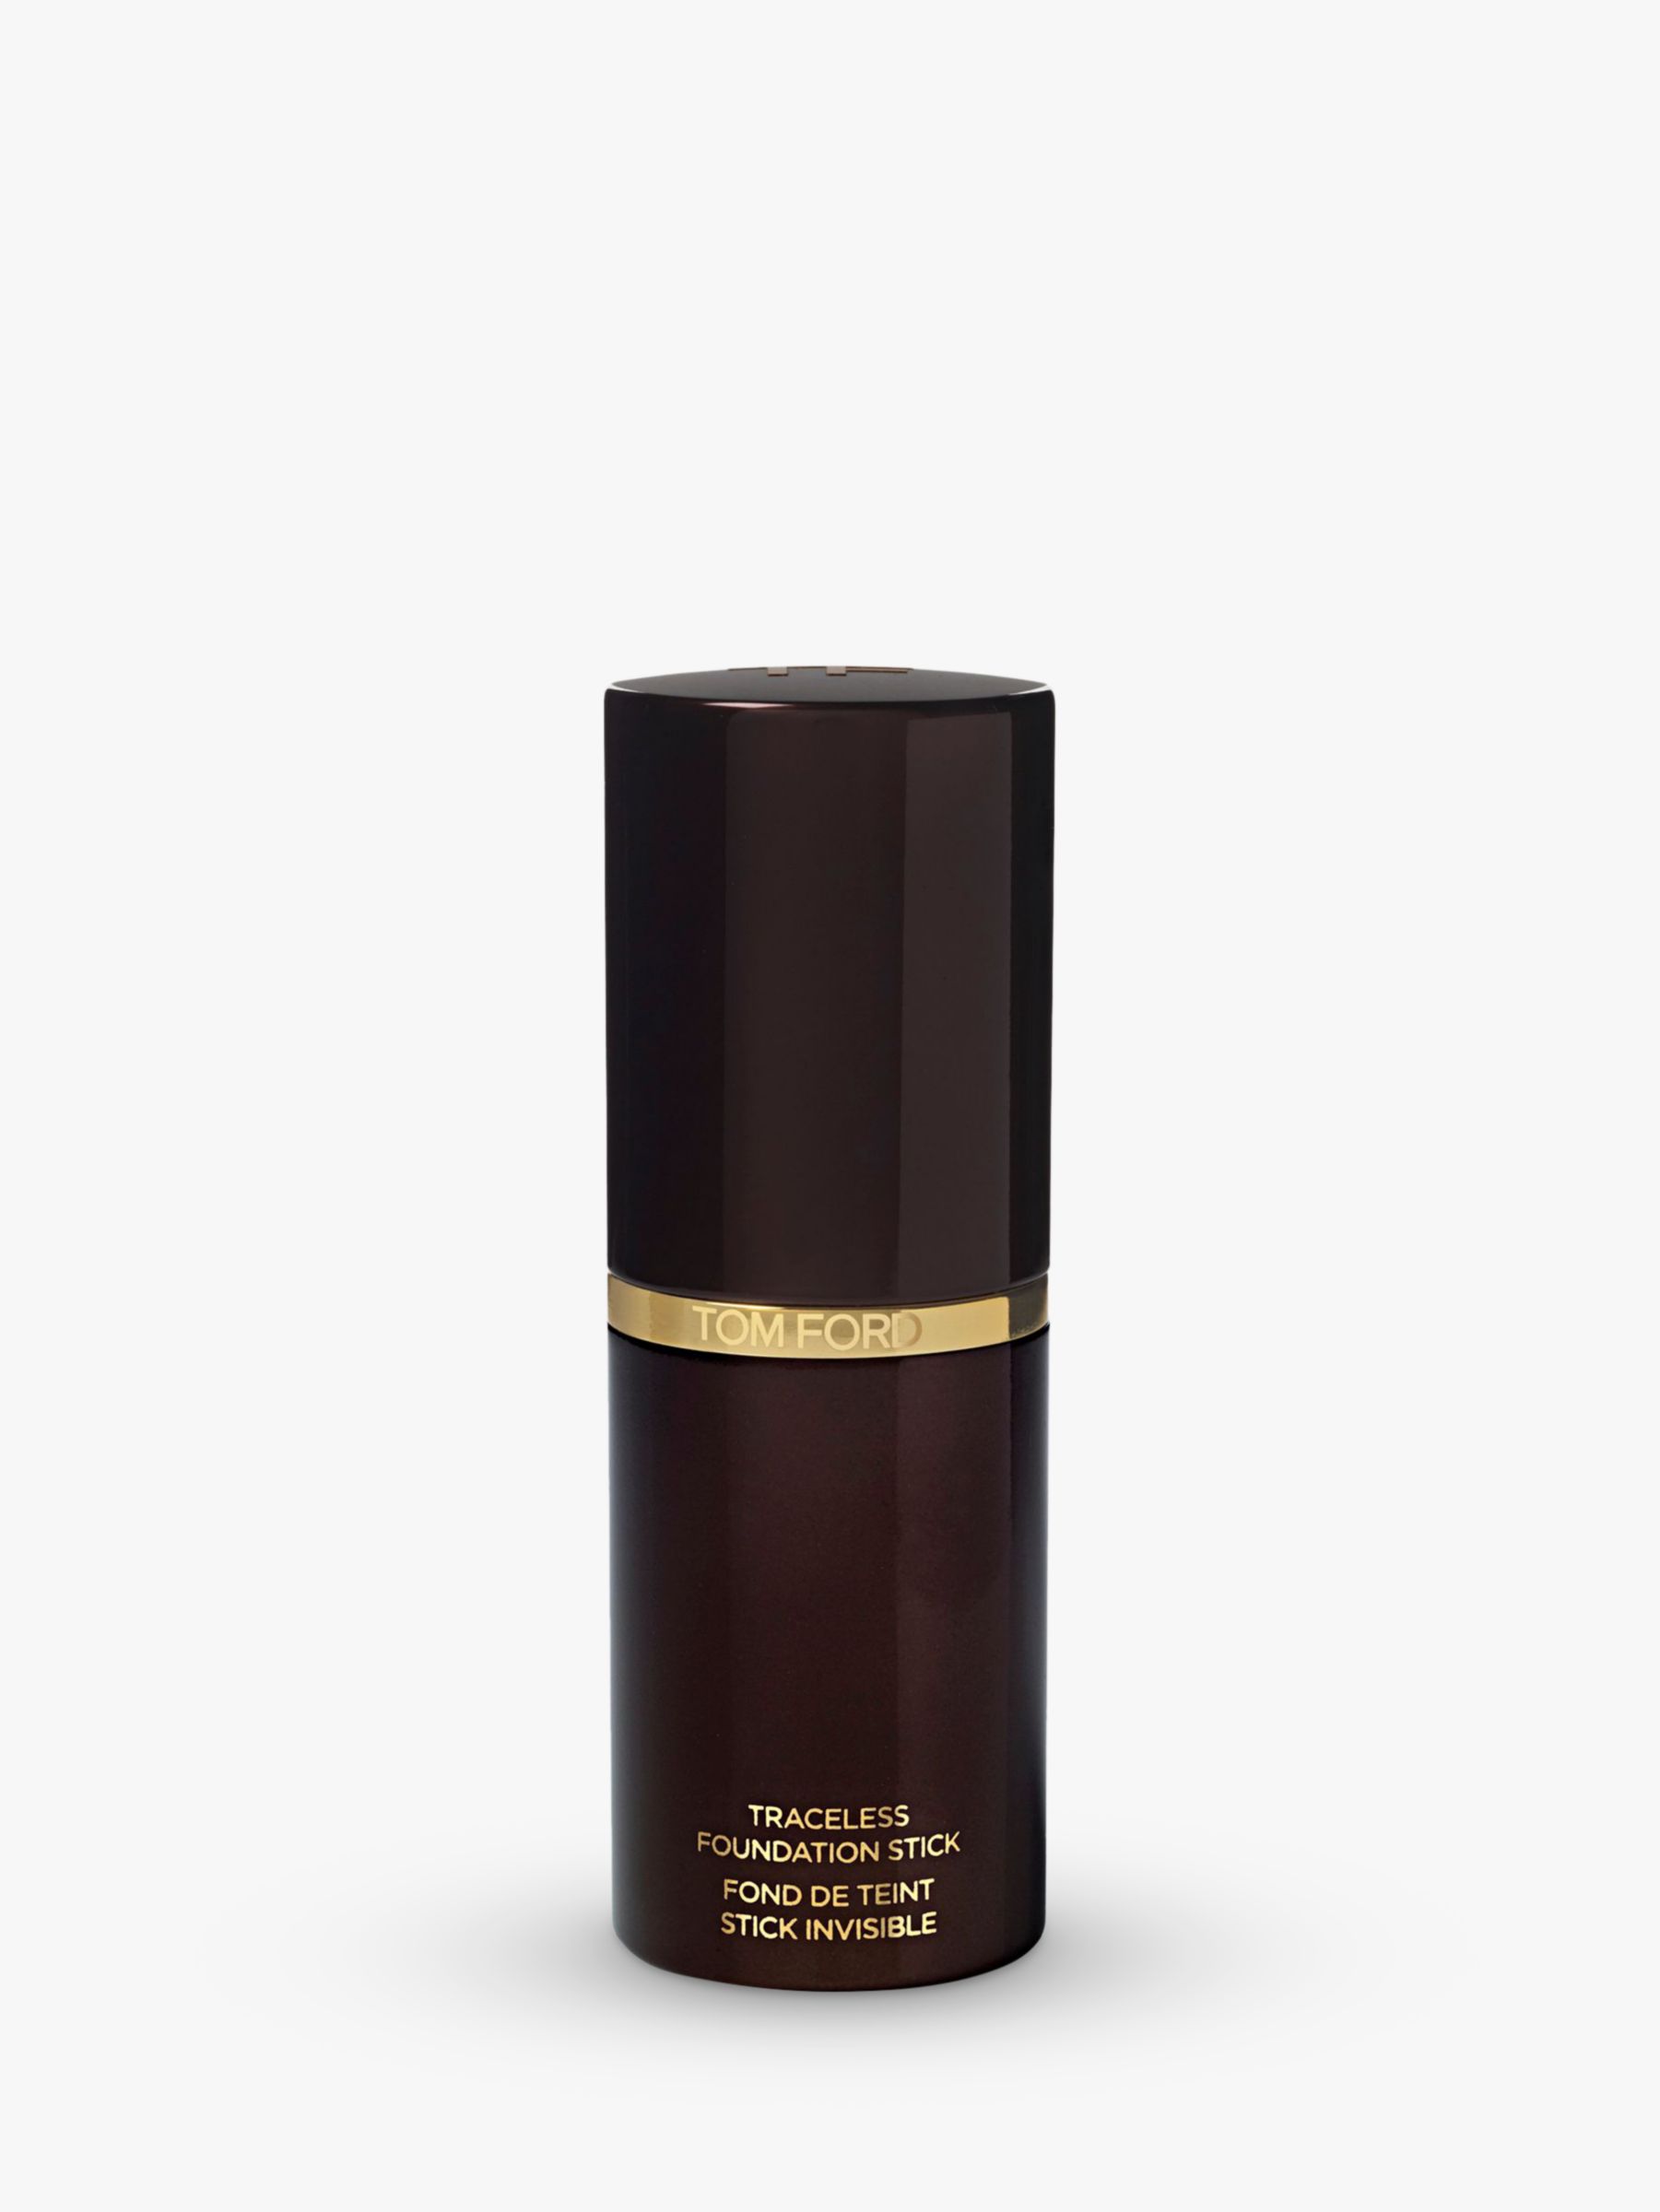 TOM FORD Traceless Foundation Stick, Bisque at John Lewis & Partners